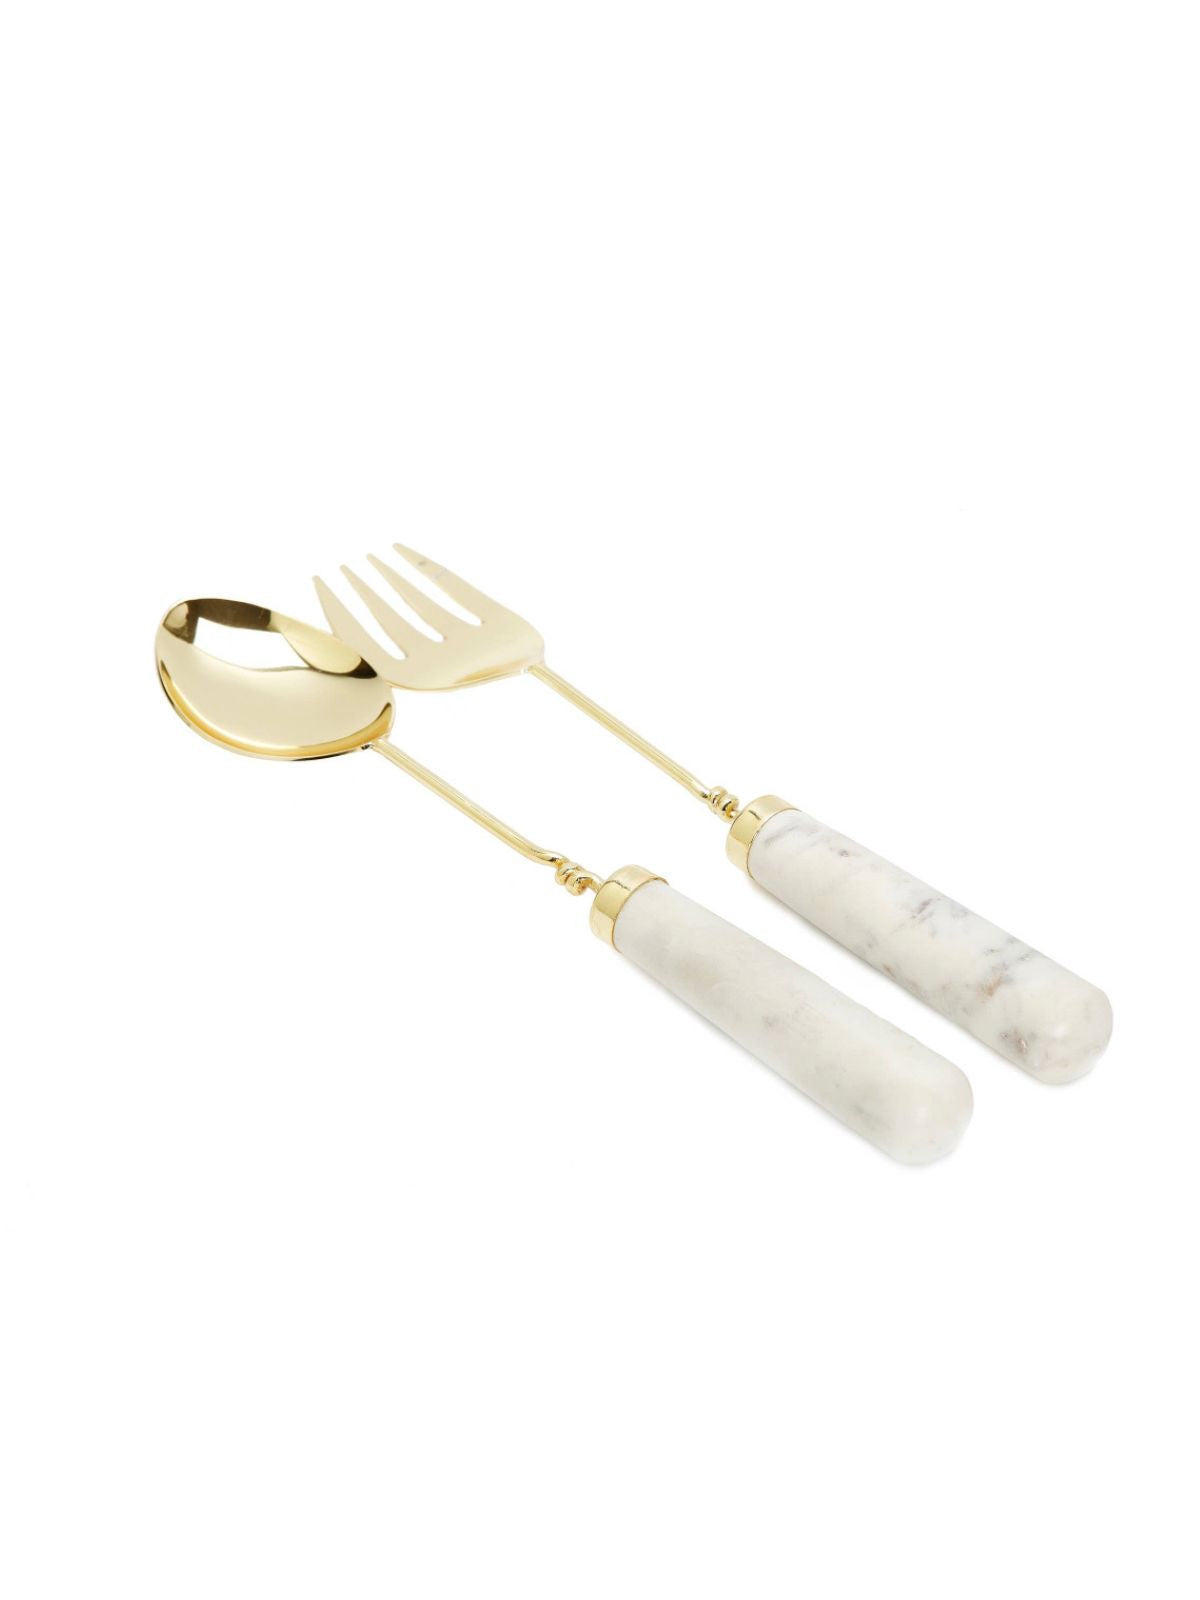 Luxury Stainless Steel Gold Salad Servers with Marble Handles sold by KYA Home Decor.